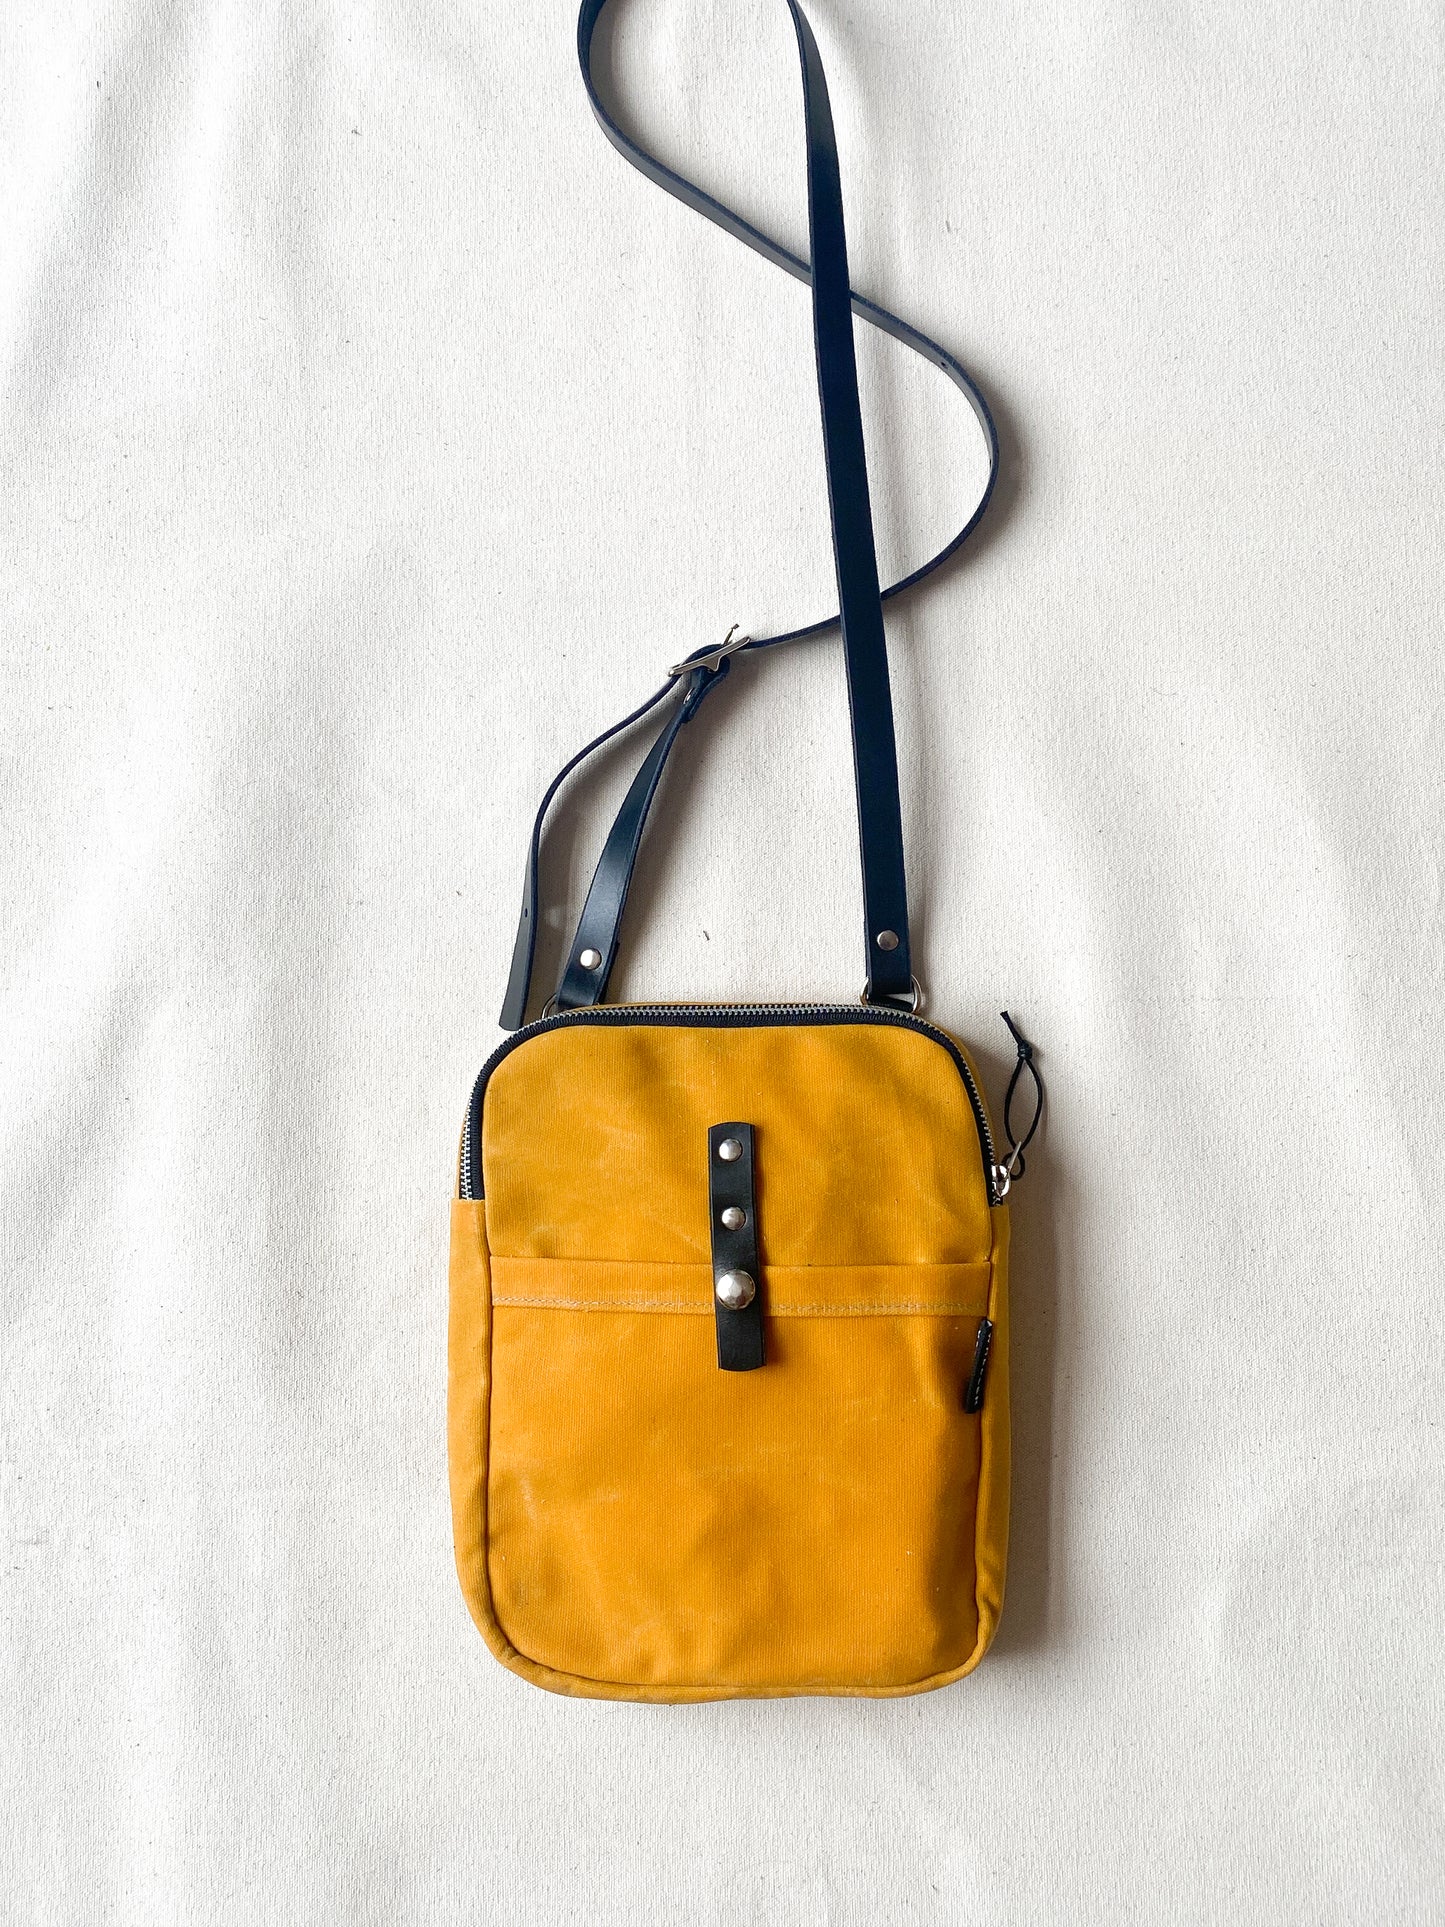 Waxed Canvas Mini Messenger in yellow.